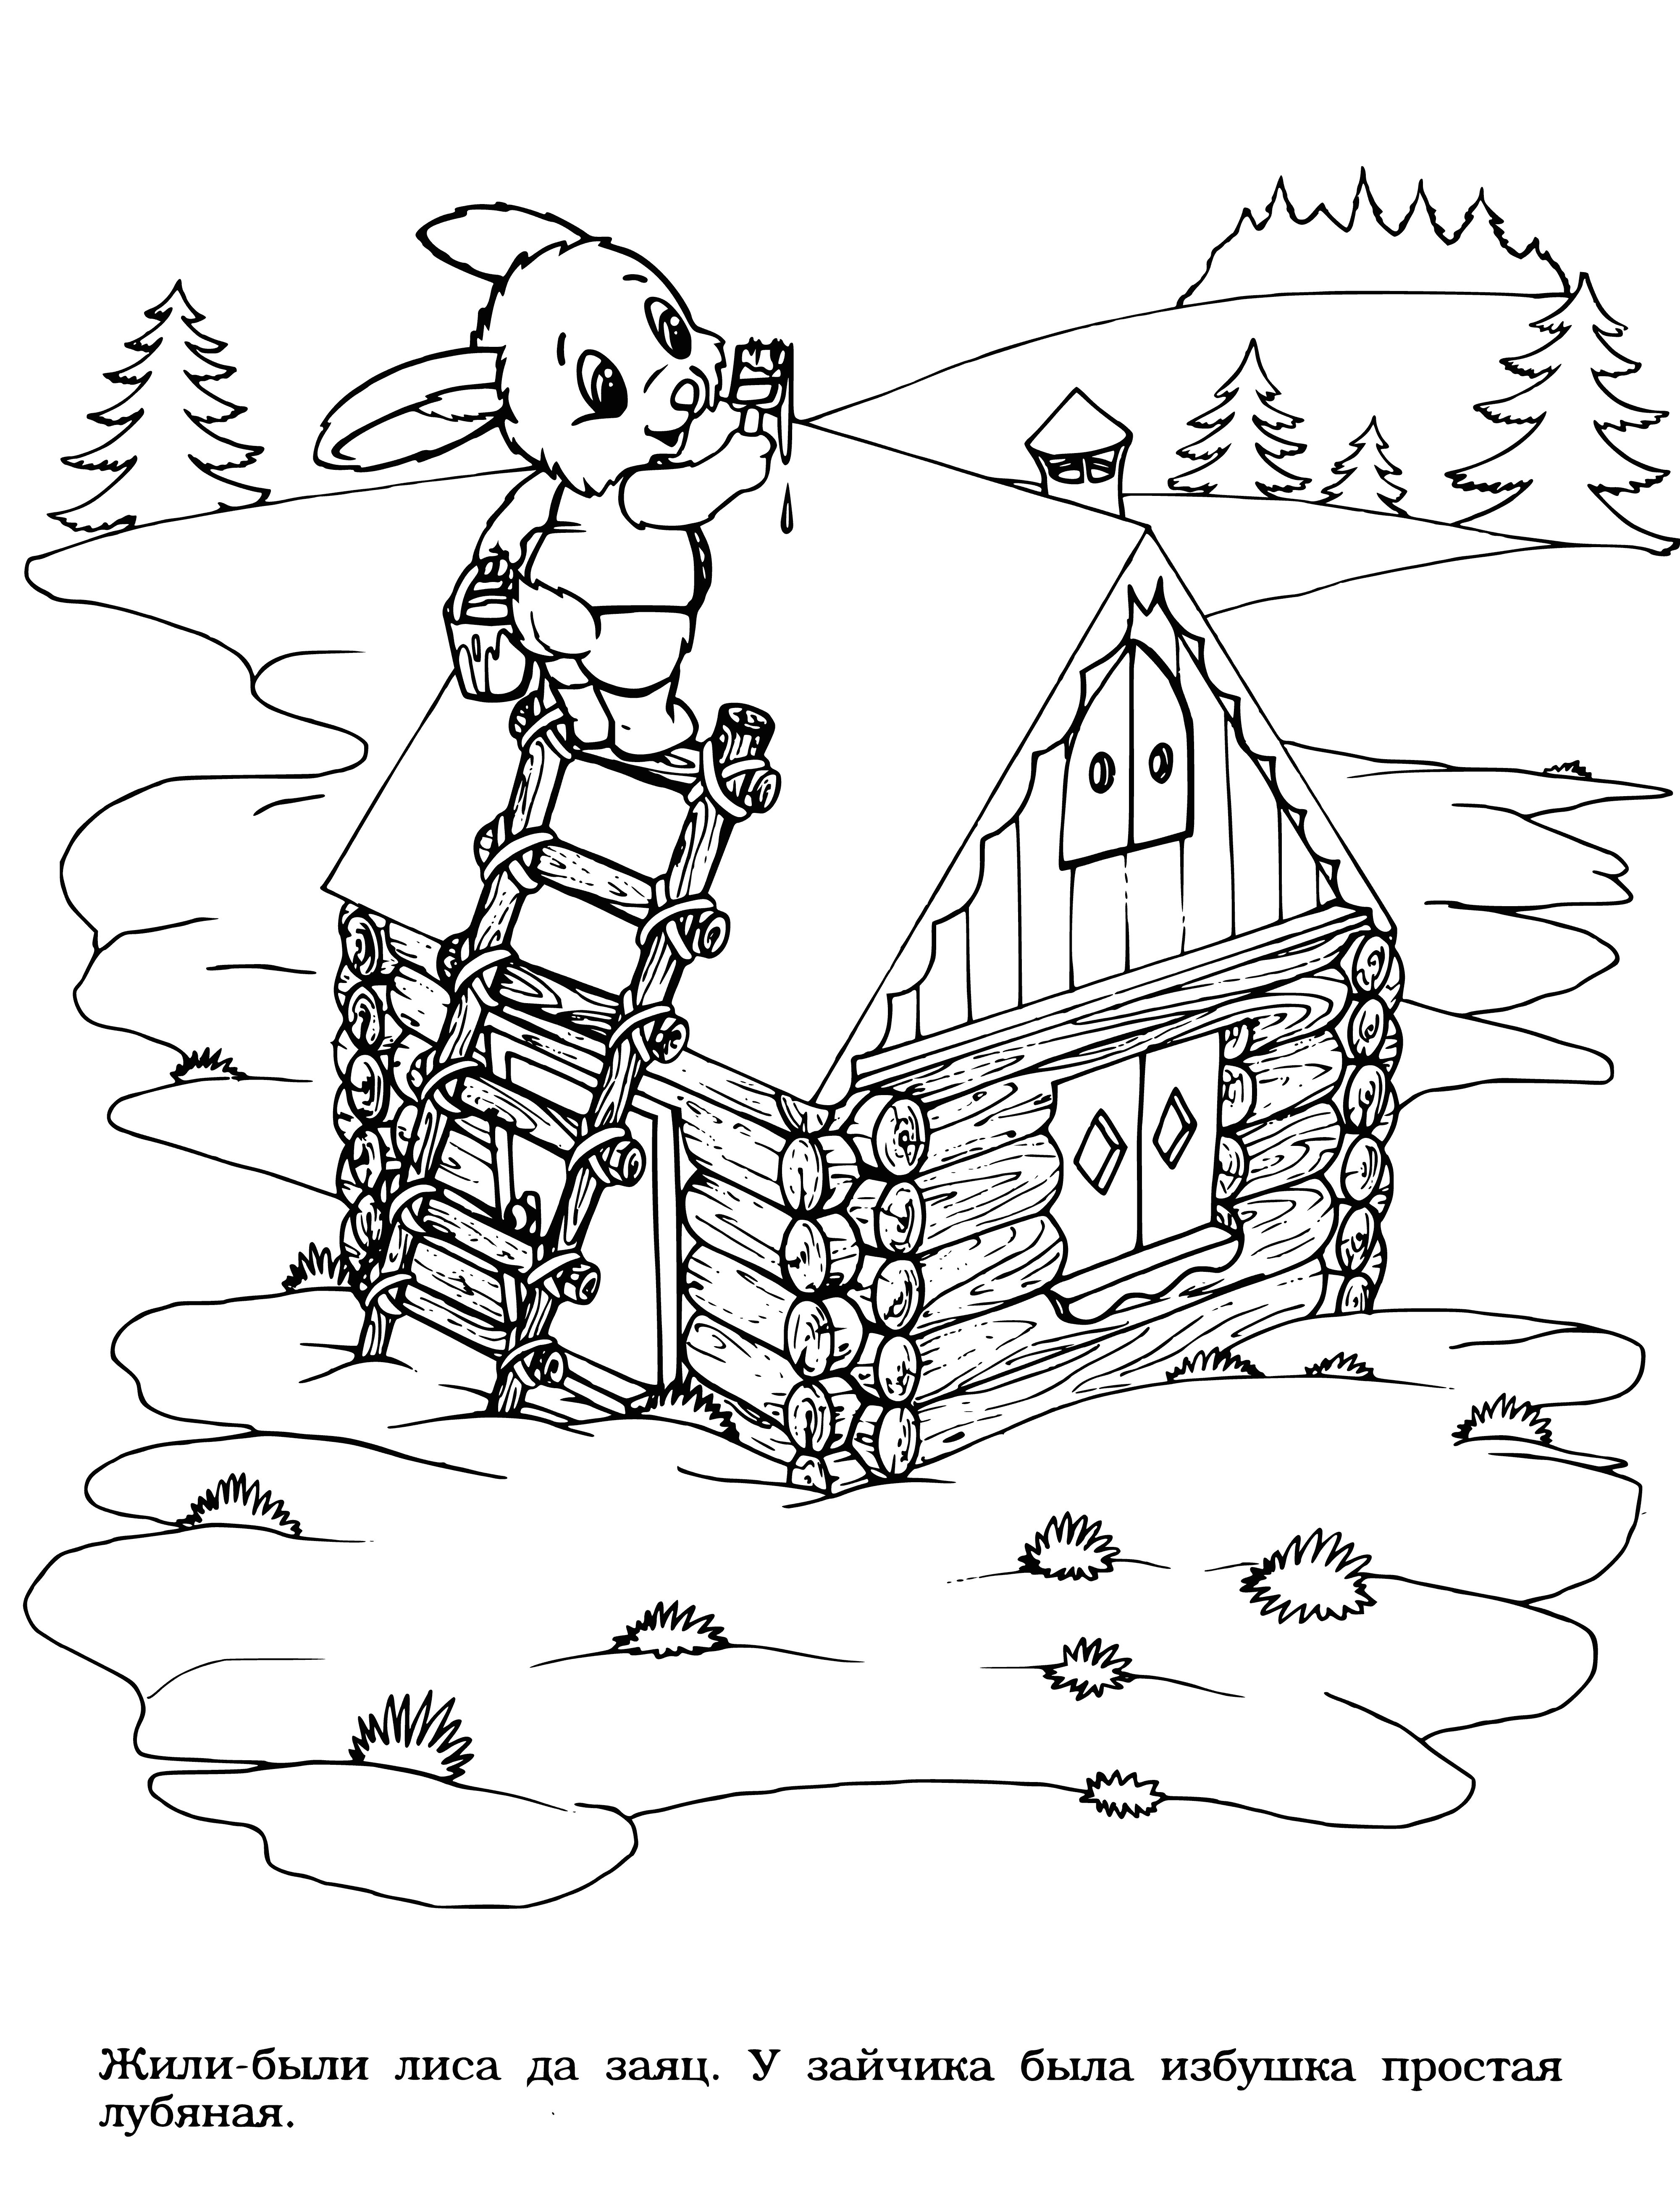 coloring page: Bunny builds structure from sticks on small hill in forest, two other bunnies present in coloring page. #coloringpage #bunny